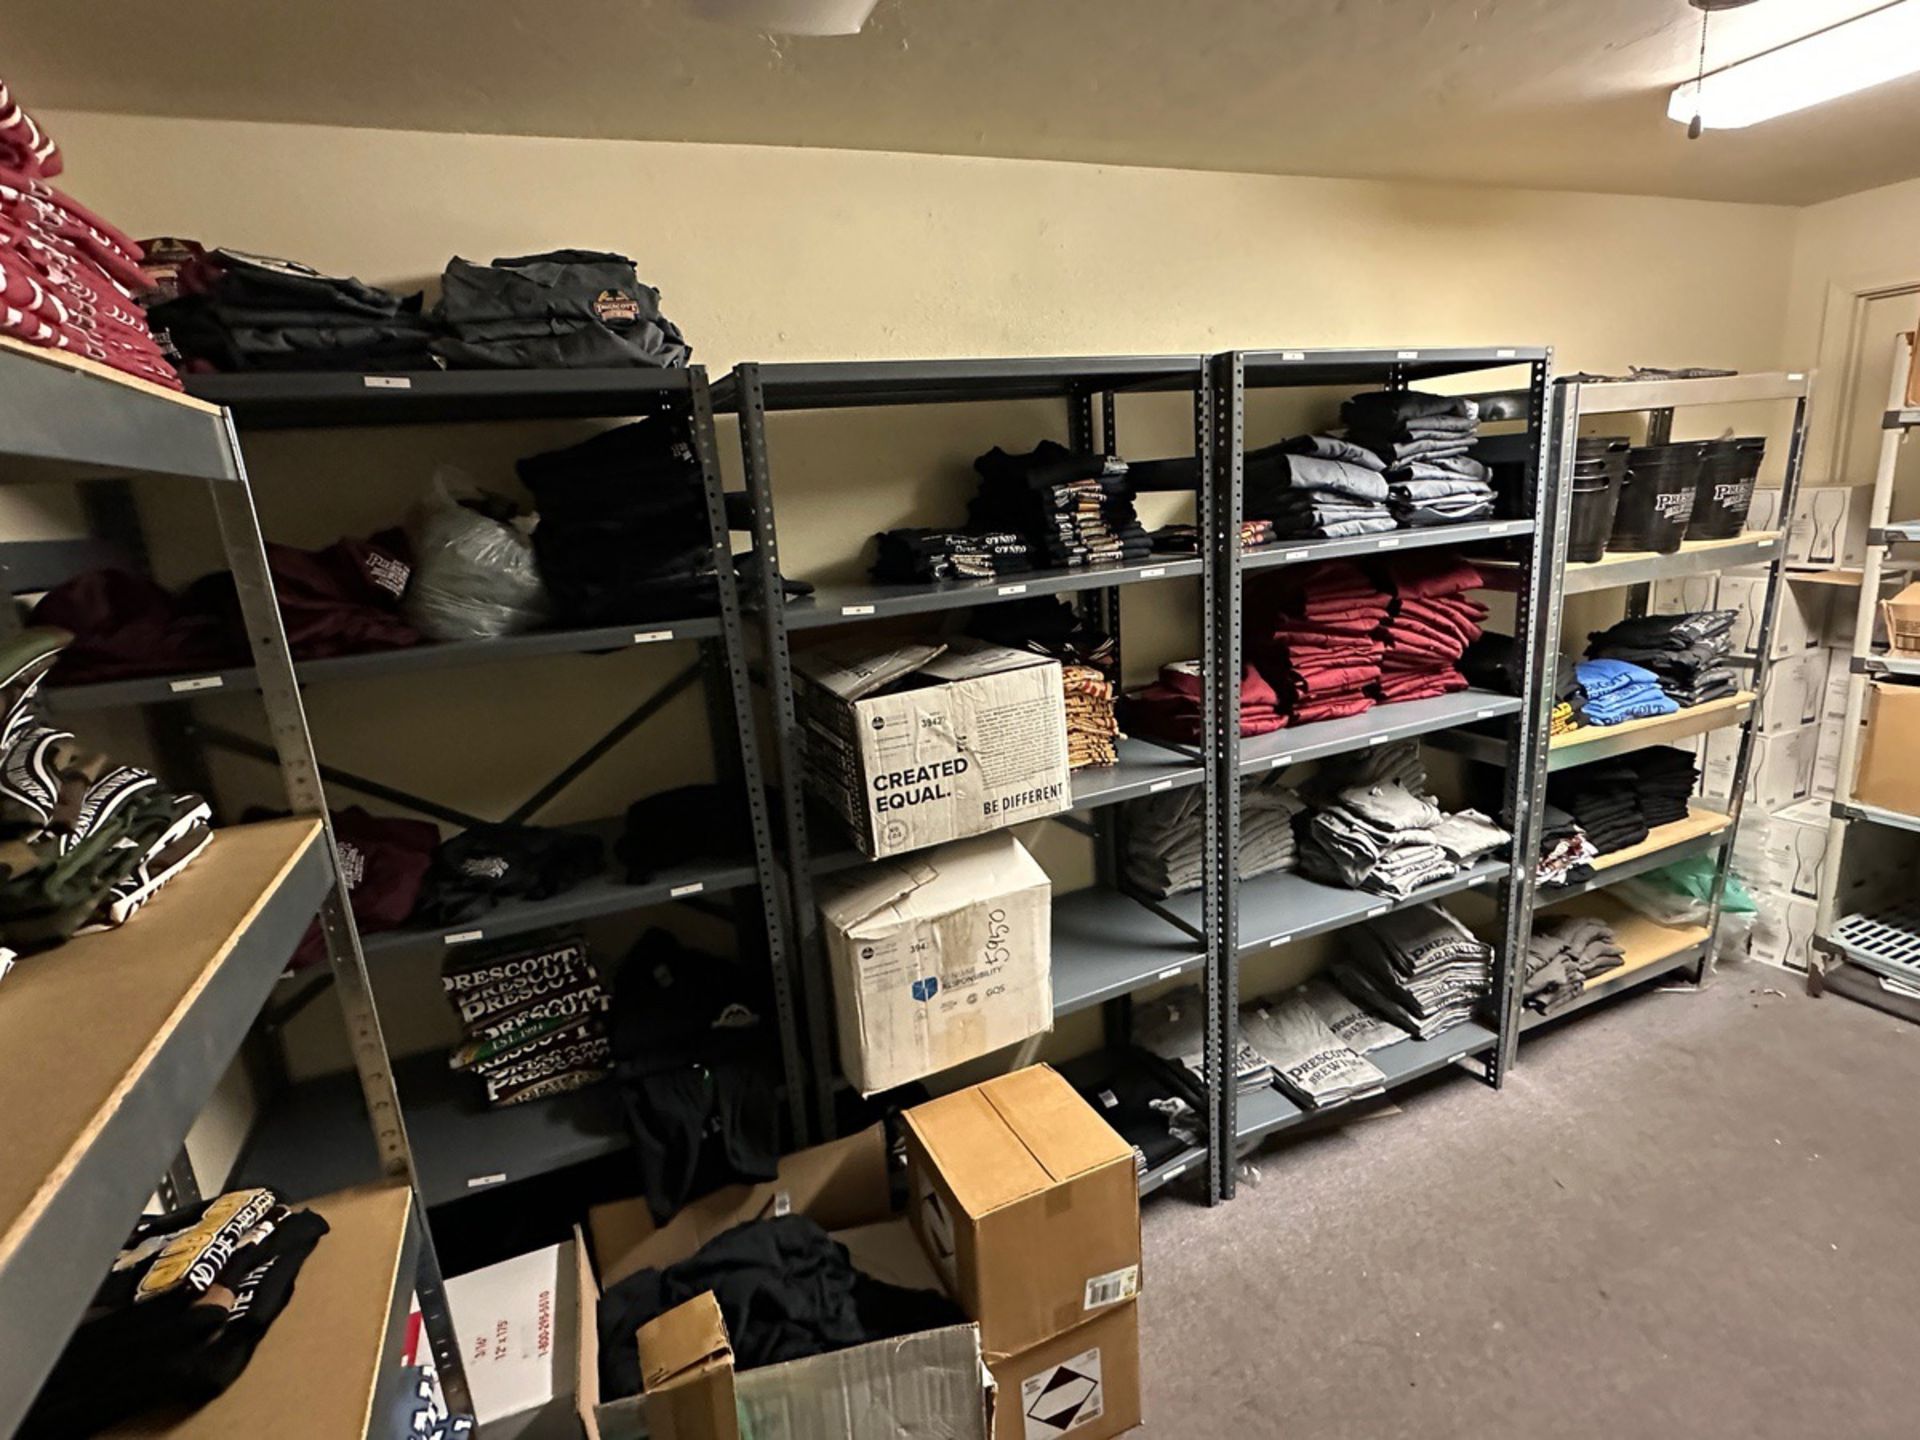 Lot of Contents of Merchandise Room - Including Shelving, Glassware, - Subj to Bulk | Rig Fee $125 - Image 2 of 8